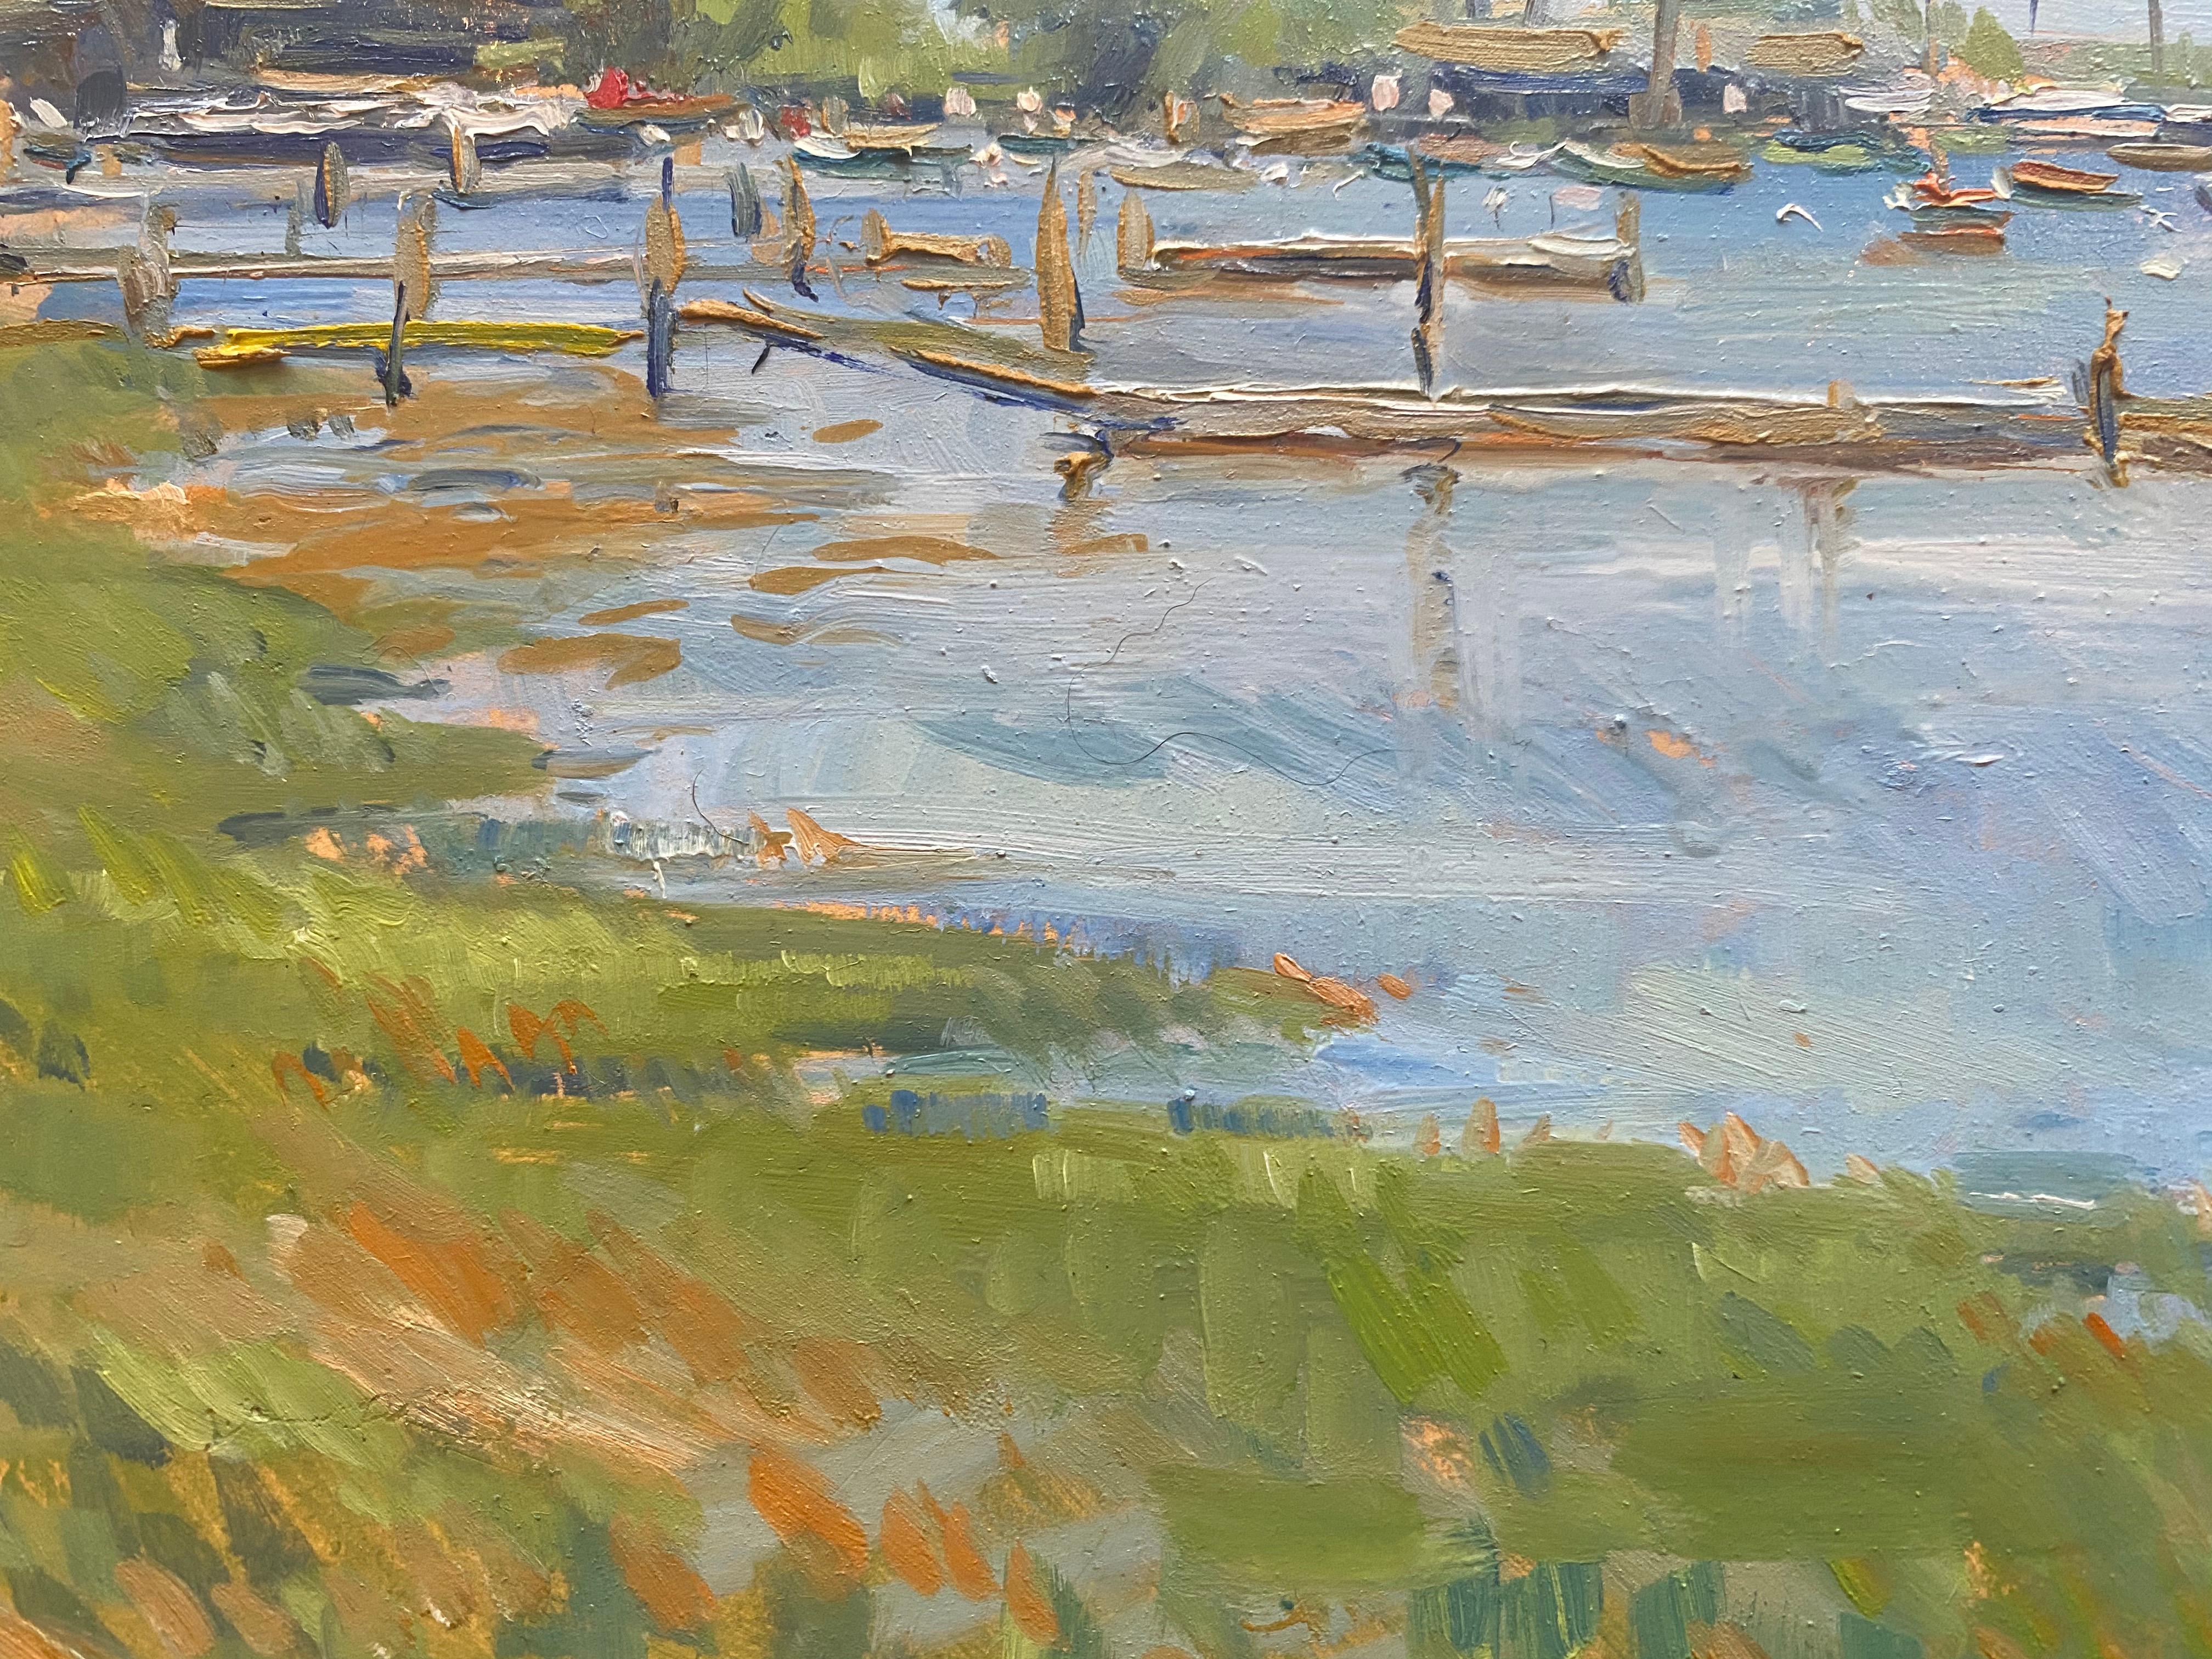 Oil painting of Chequit Point in Shelter Island. Painted en plein air. 



Artist Bio
Tina Orsolic Dalessio is a figurative painter born and raised in Zagreb, Croatia. She graduated from Florence Academy of Art in June 2018. She also holds a